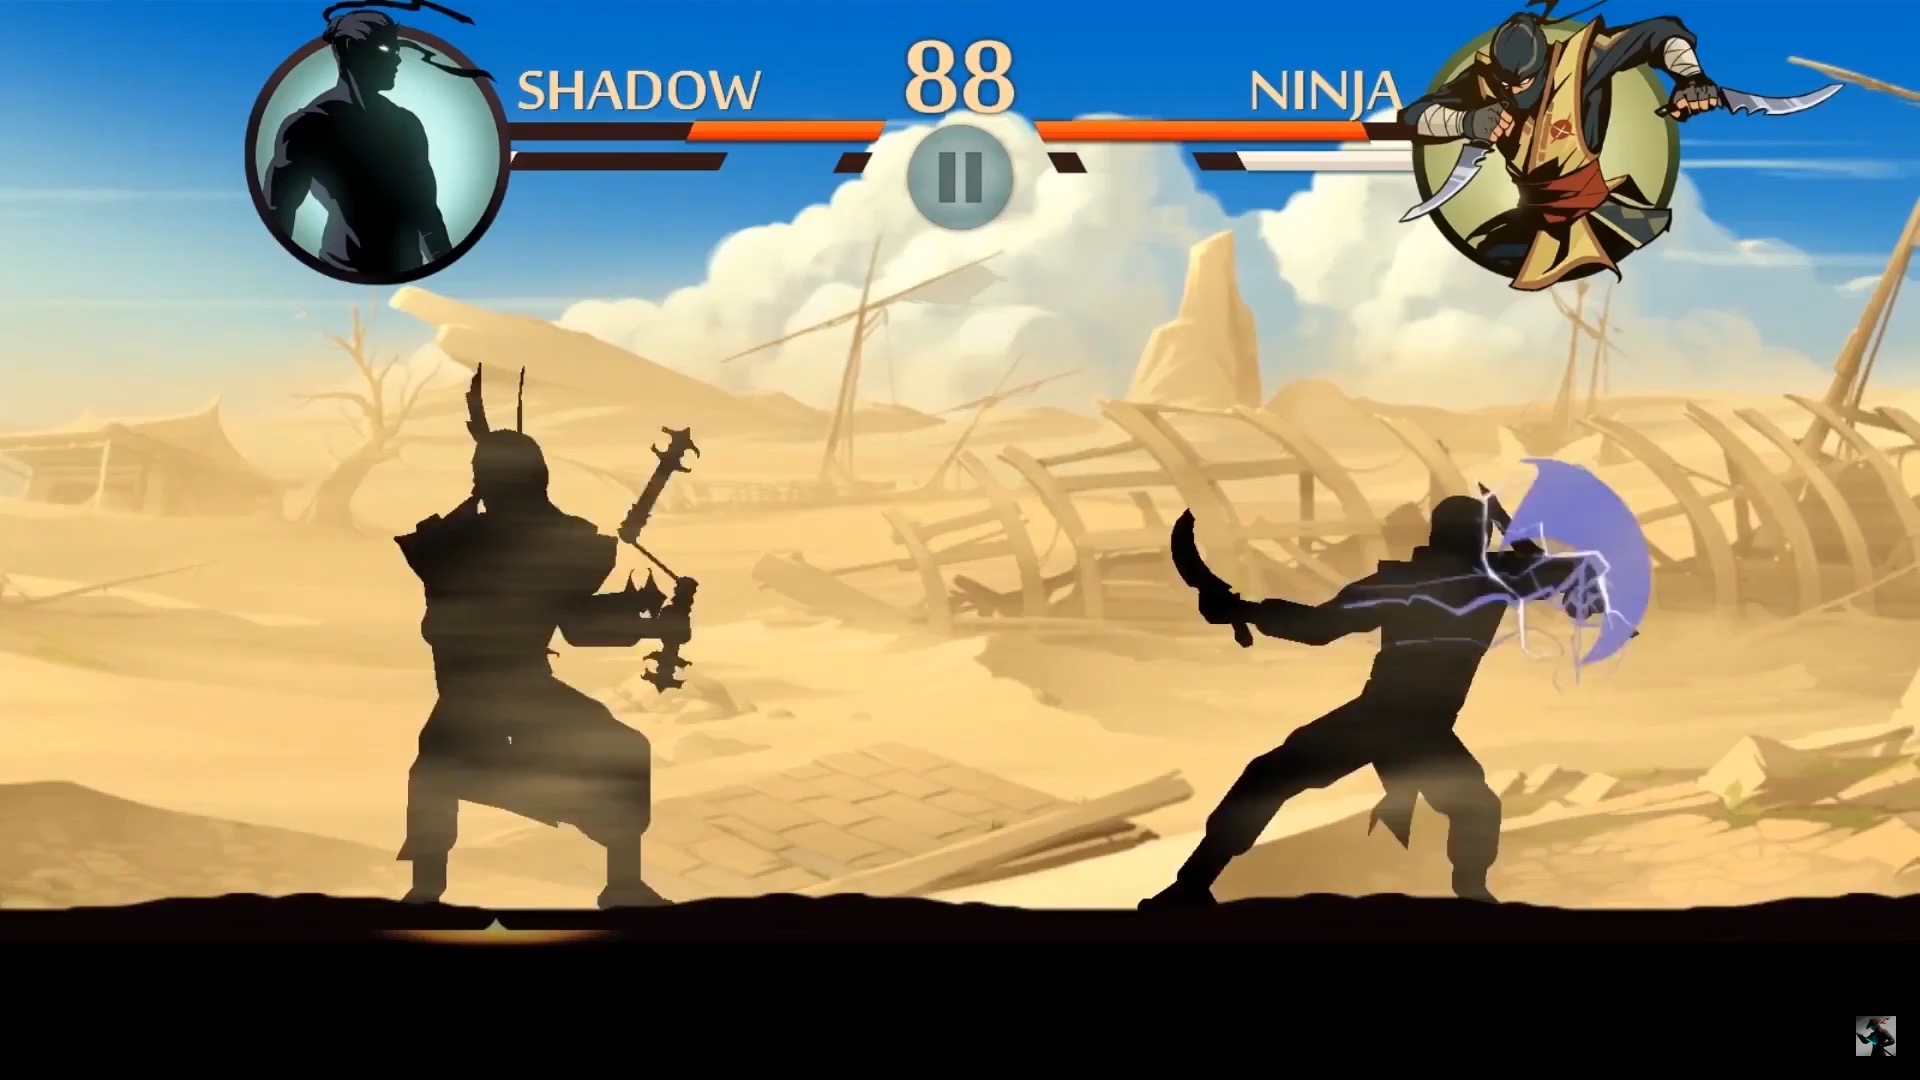 Игру shadow fight 2 где. Shadow Fight 2 Shadow. Тень из игры Shadow Fight 2. Тень из Шедоу файт 2. Шадоу файт 2 Special Edition.